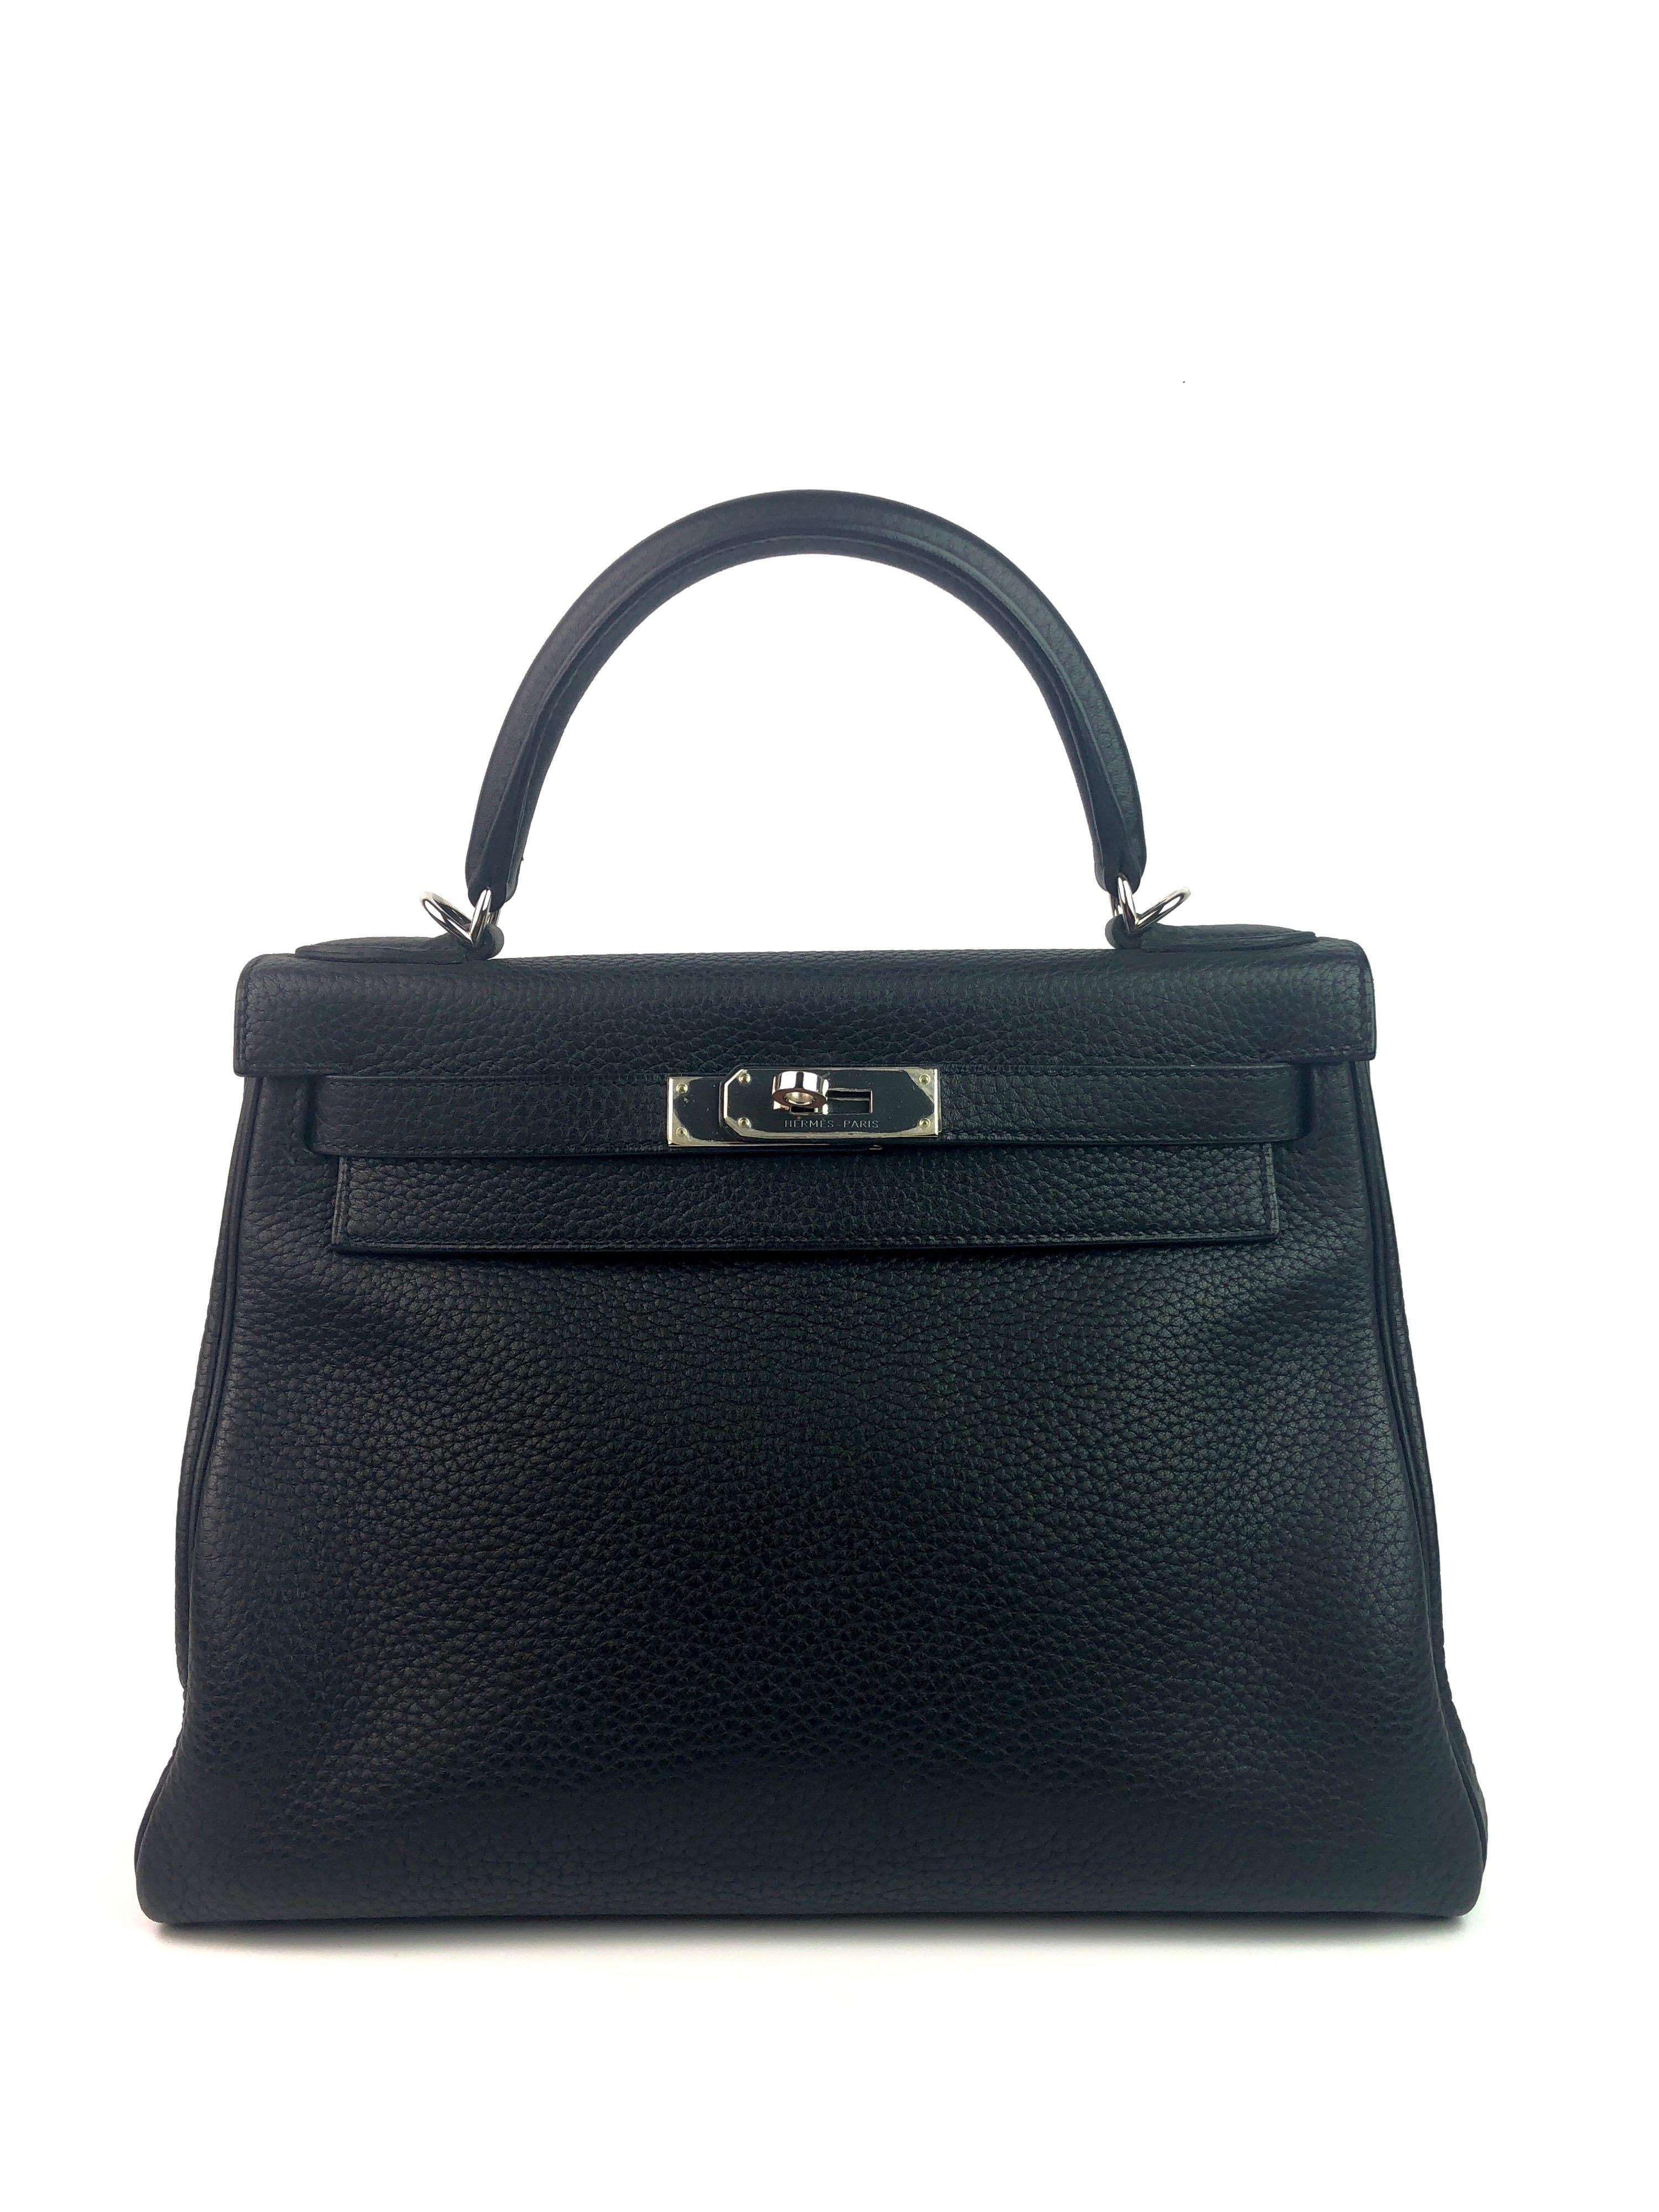 Hermes Kelly 28 Noir Black Palladium Hardware. Excellent Pristine Condition with Plastic on hardware. R stamp 2014. 

Shop with confidence from Lux Addicts. Authenticity Guaranteed! 